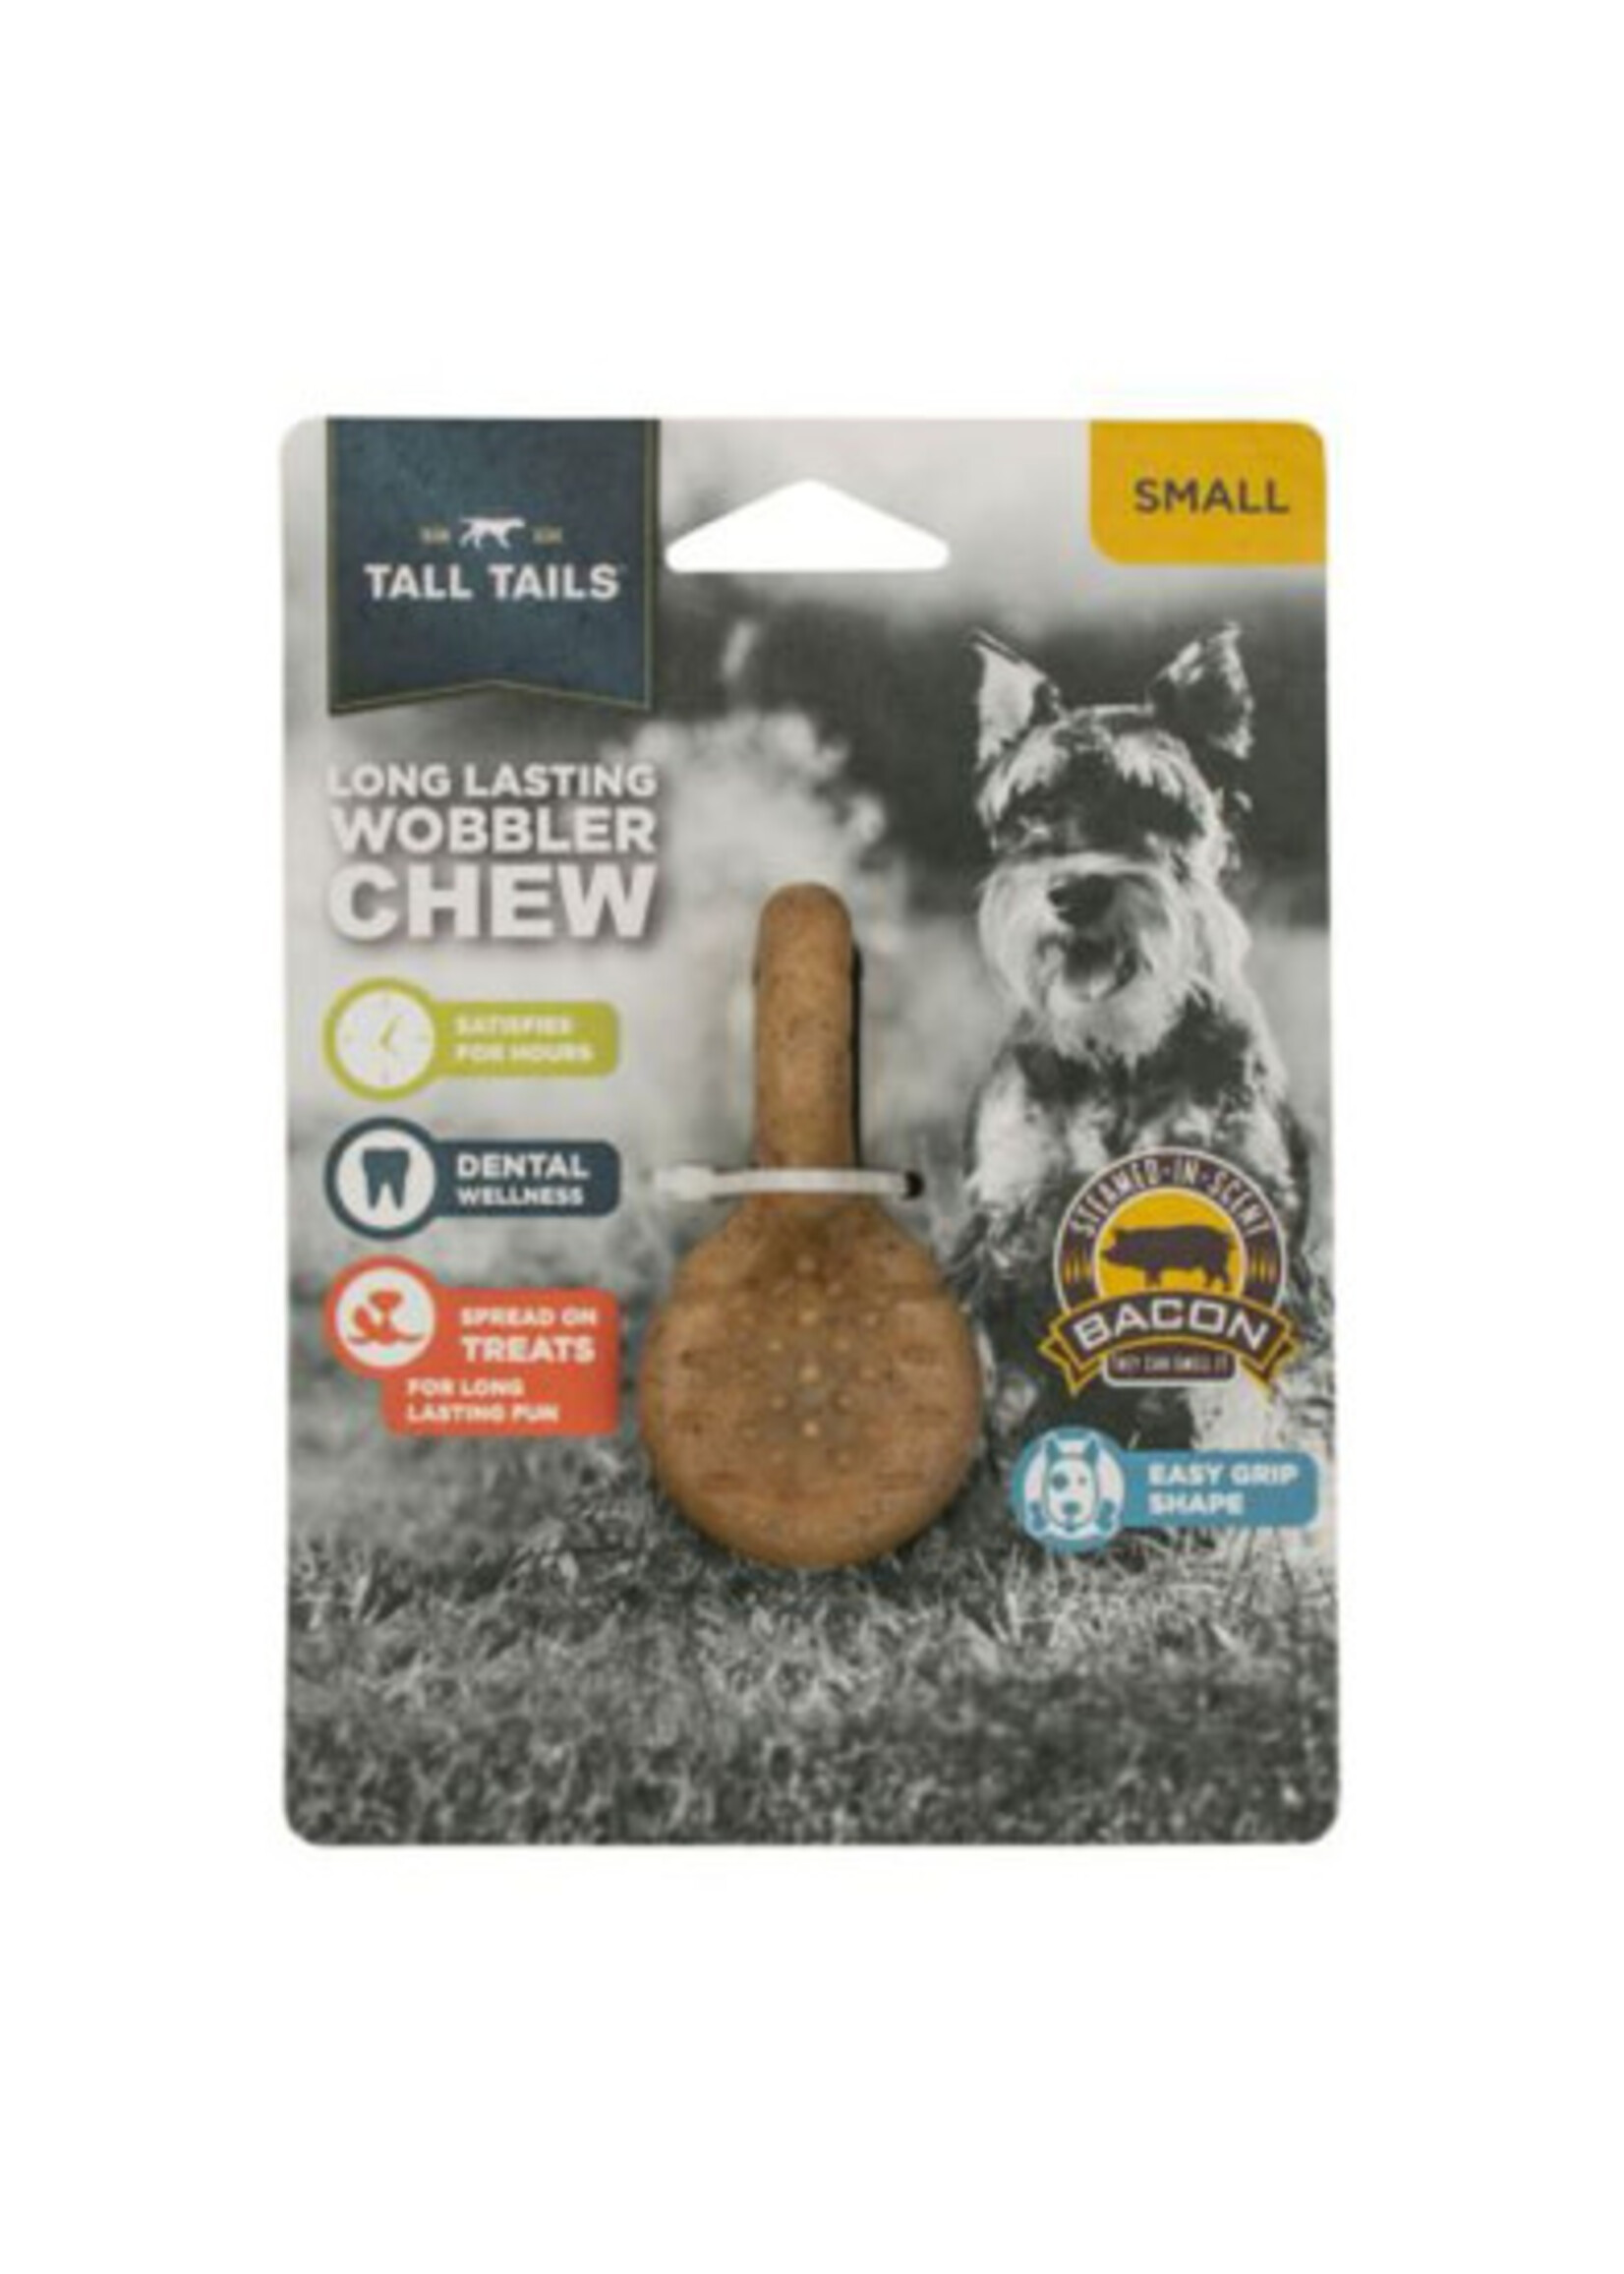 Tall Tails Tall Tails- Wobble Walker Large Wobbler Chew